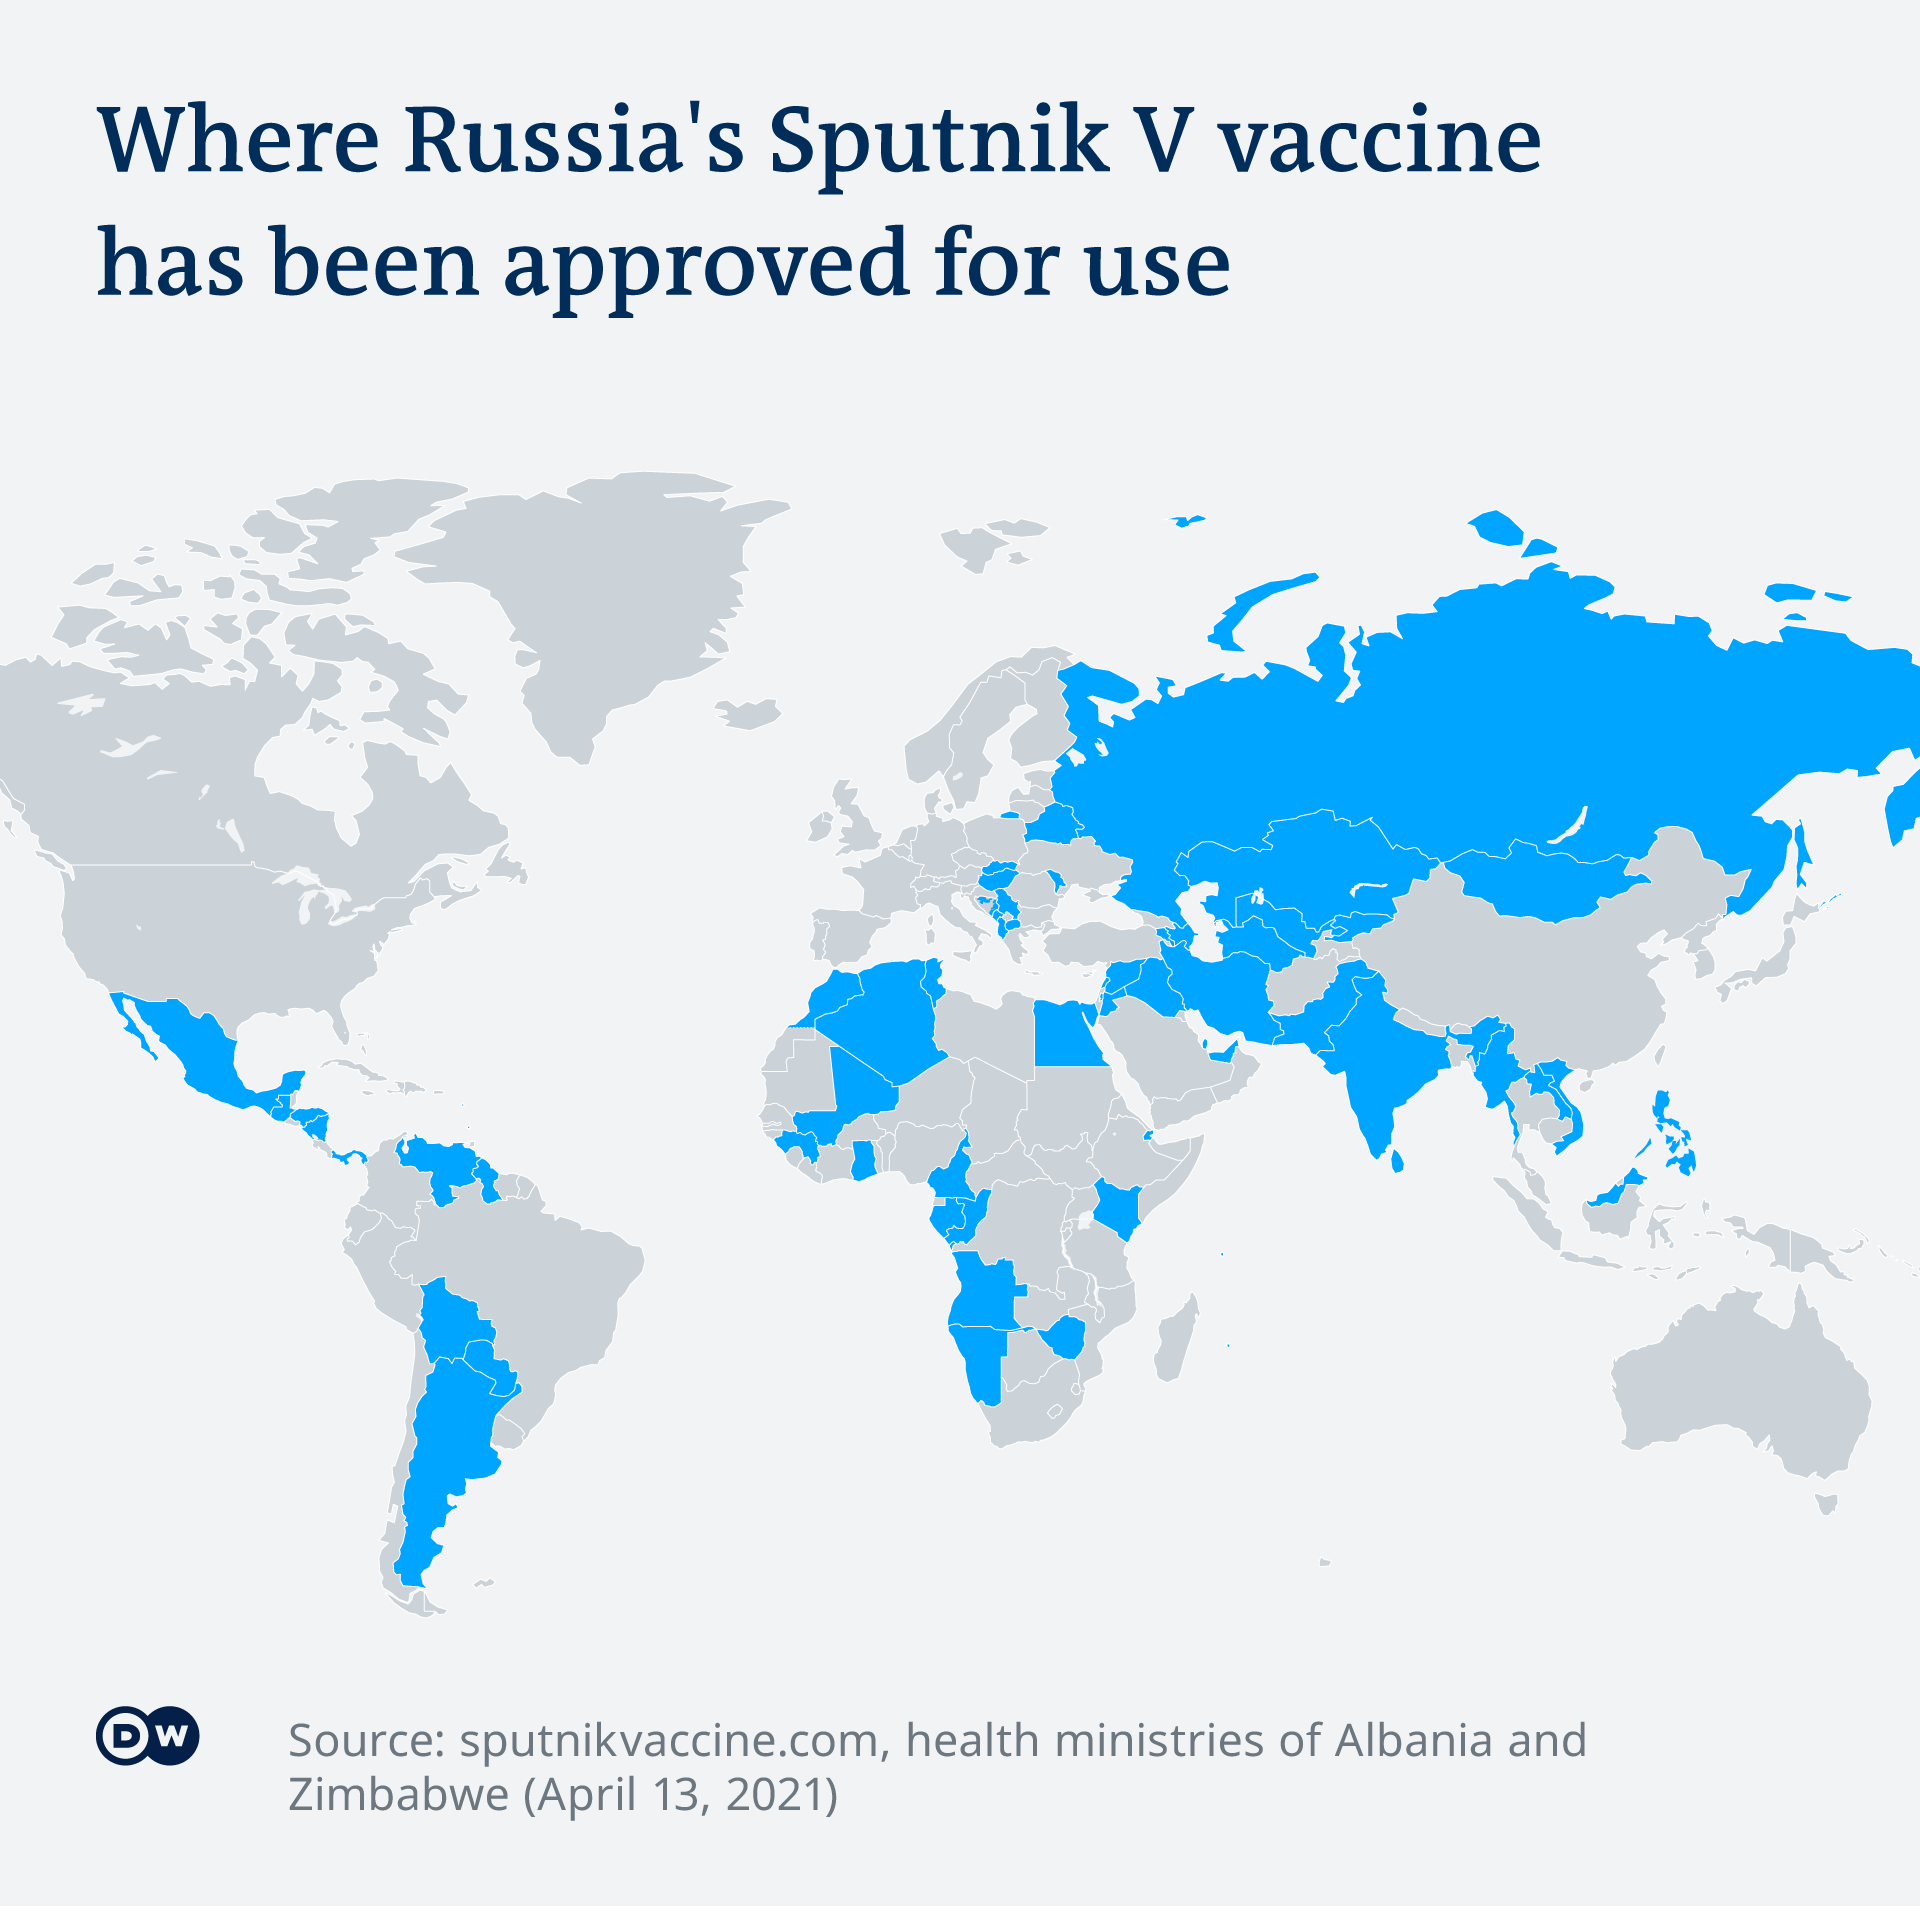 Map indicating where Sputnik V has been approved